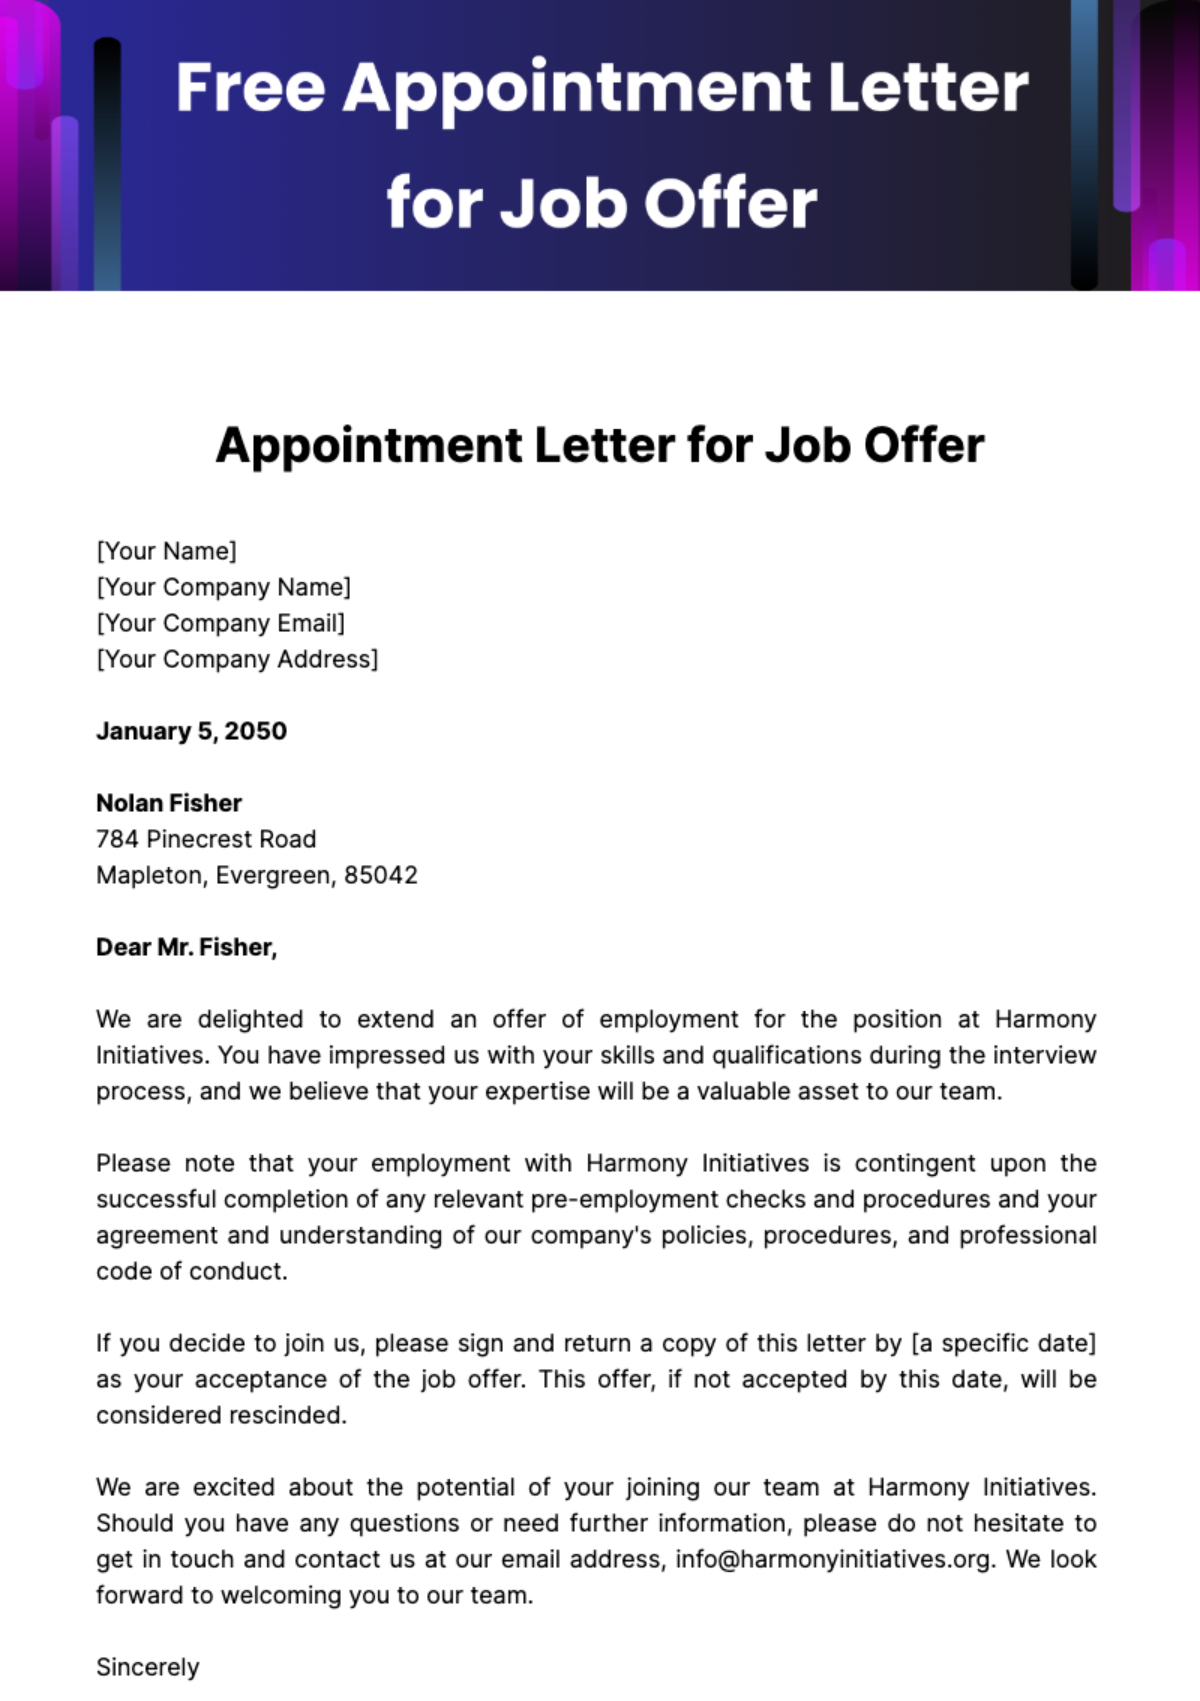 Free Appointment Letter for Job Offer Template